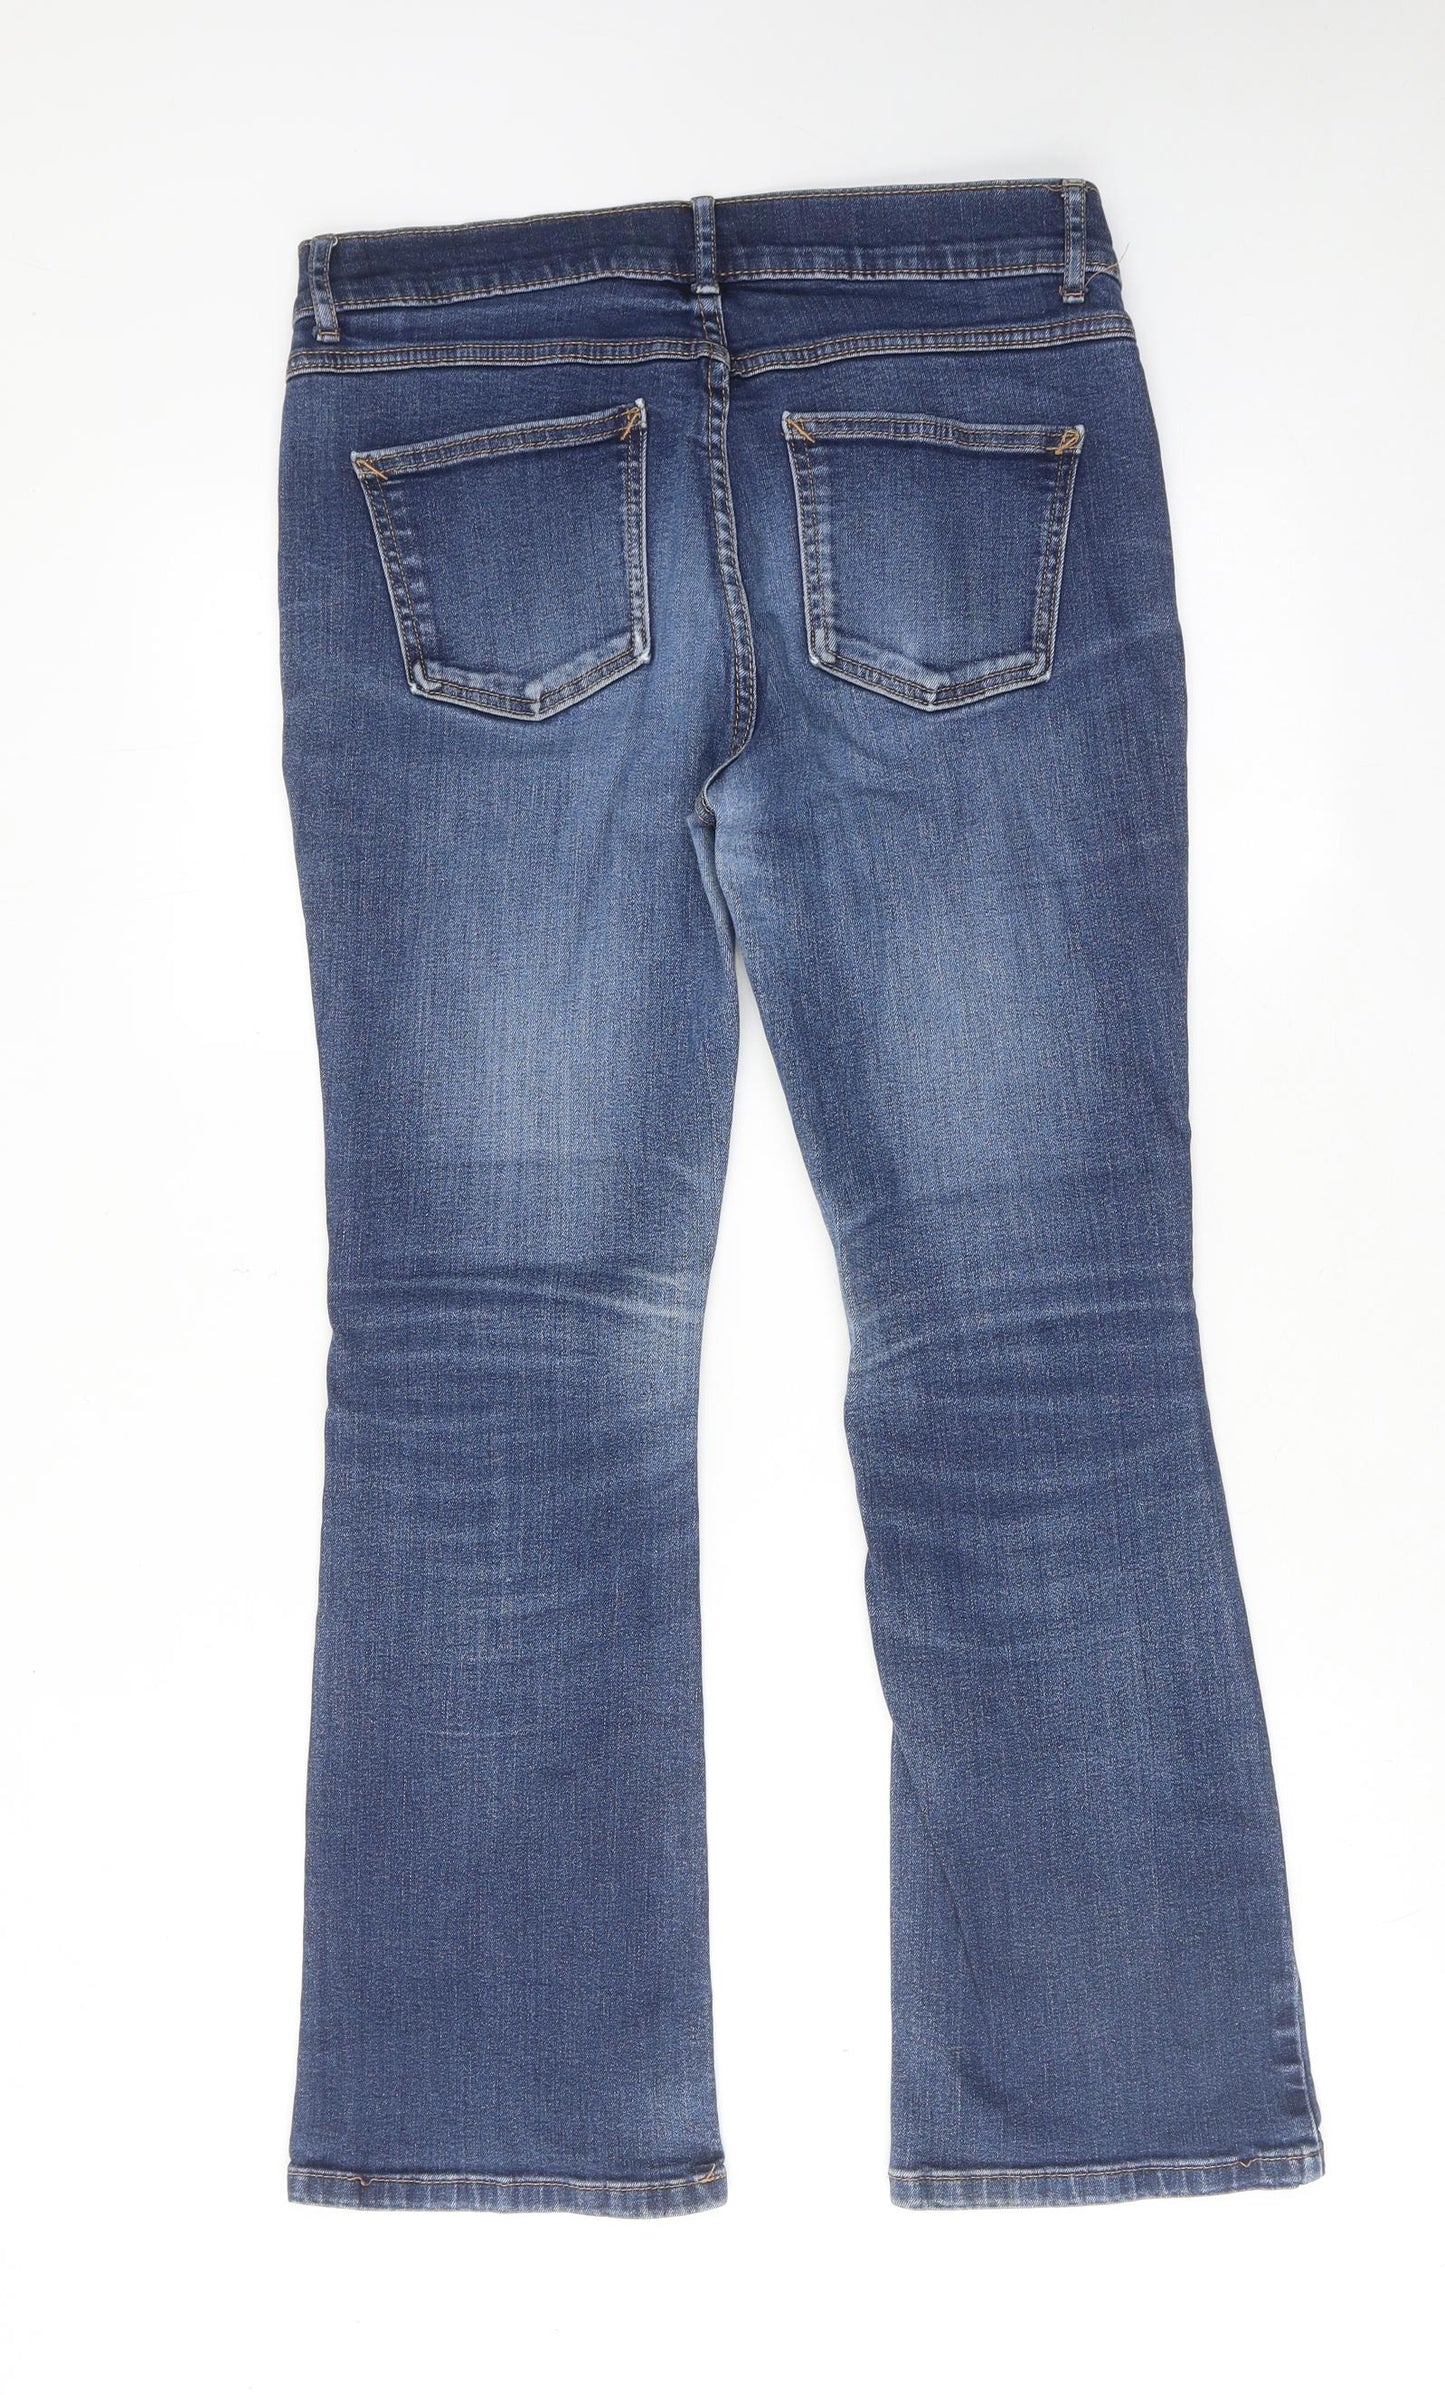 Marks and Spencer Womens Blue Cotton Bootcut Jeans Size 12 Slim Zip